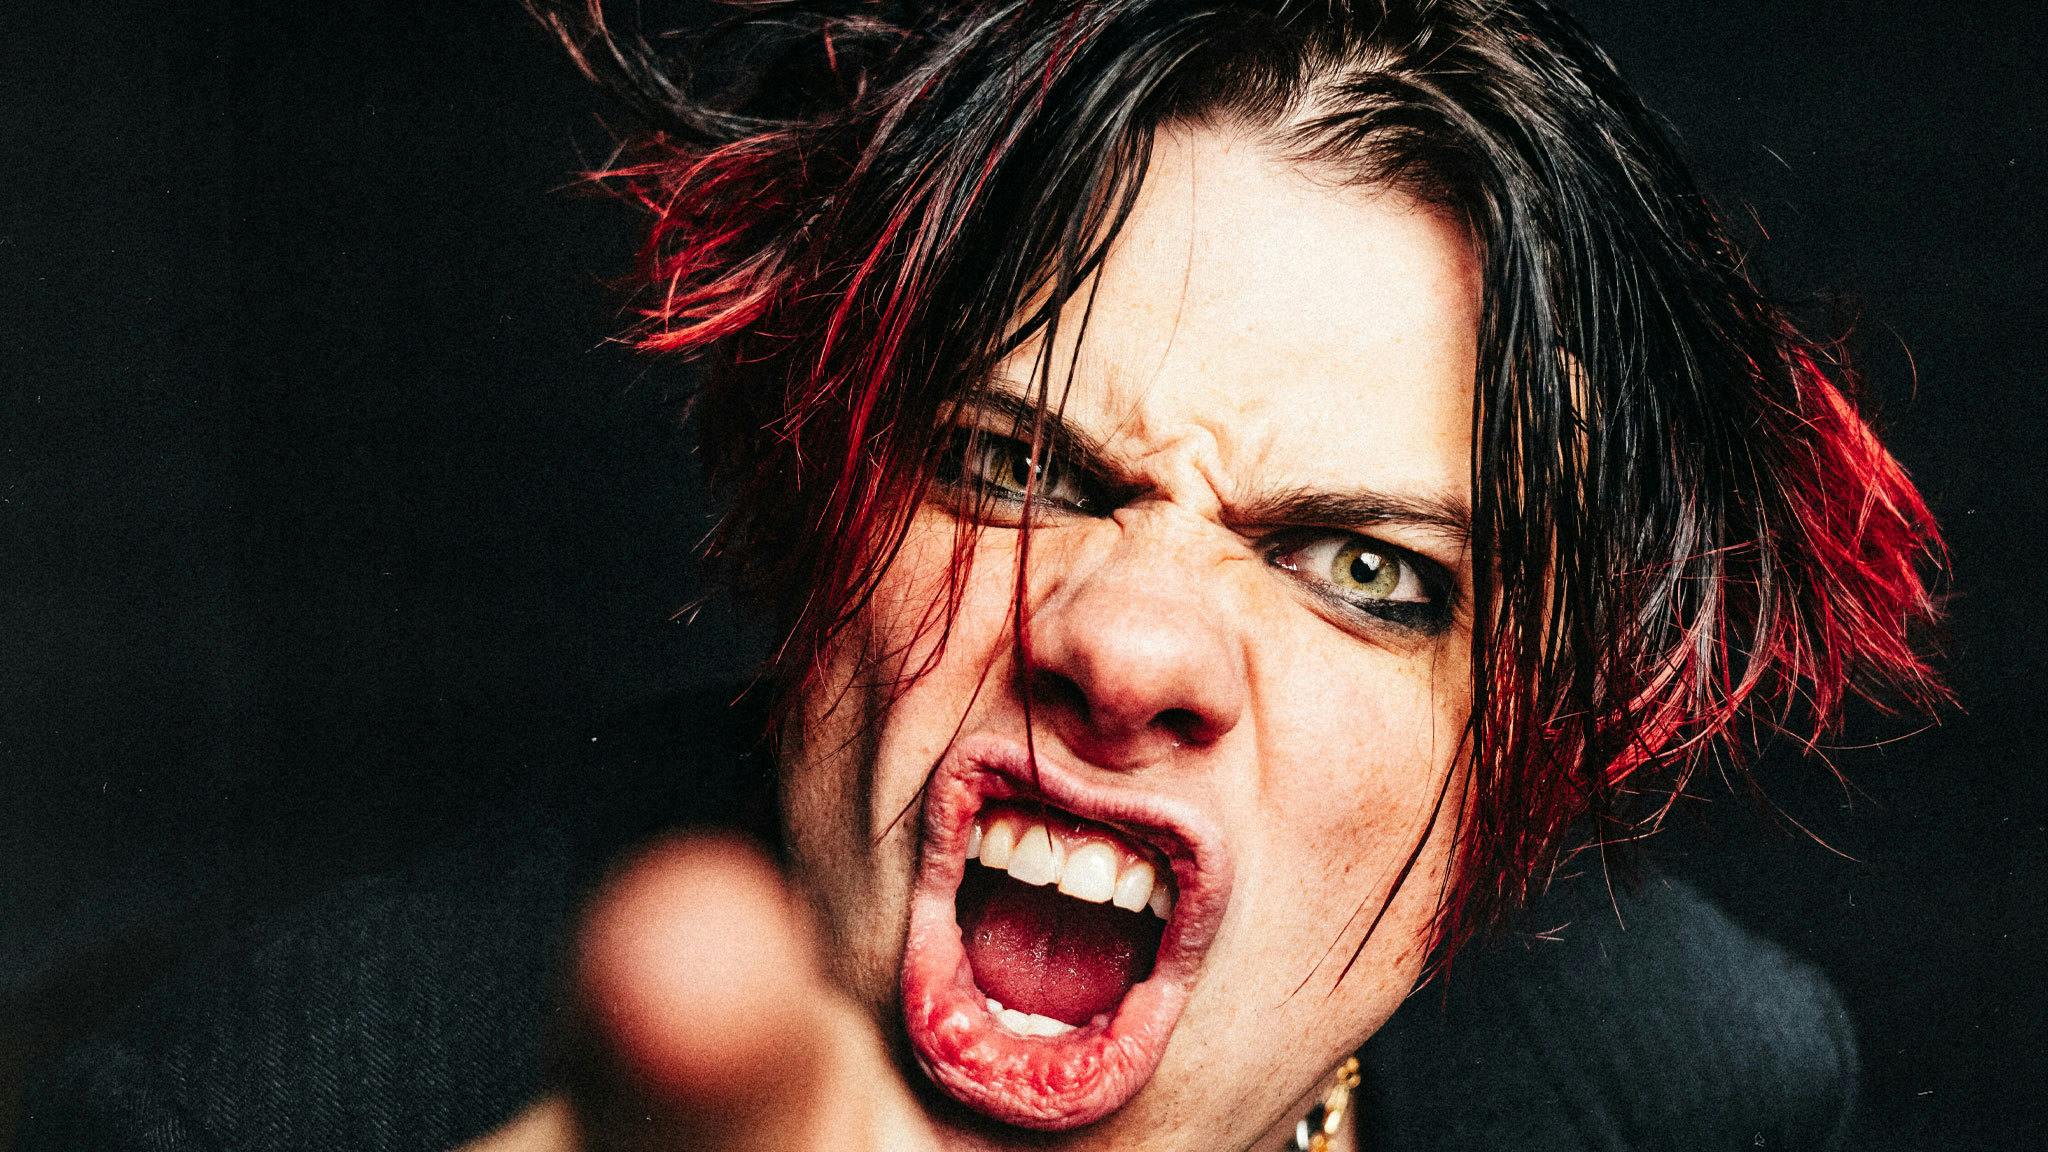 YUNGBLUD announces UK arena tour with Neck Deep